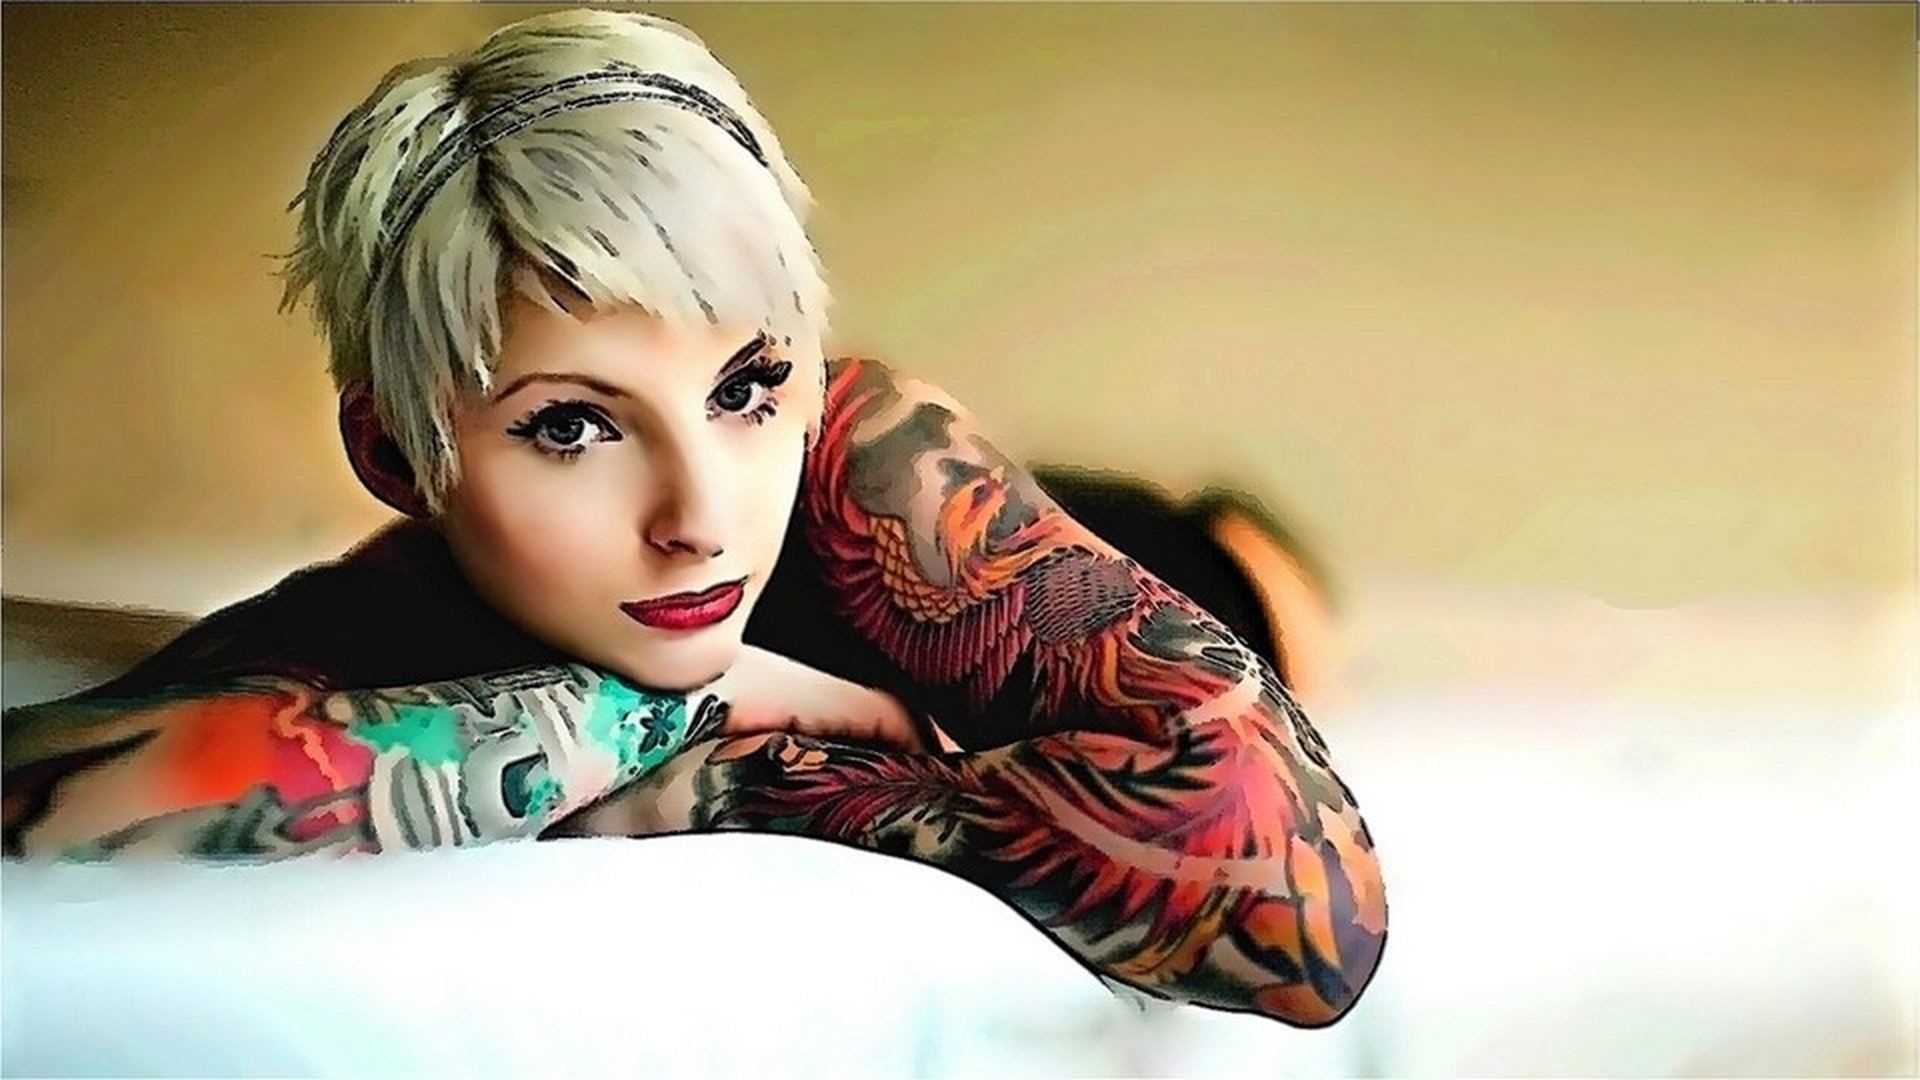 1920x1080, Custom Hdq Tattoo Girl Wallpapers And Pictures - Hd Wallpapers Tattoo Girl - HD Wallpaper 